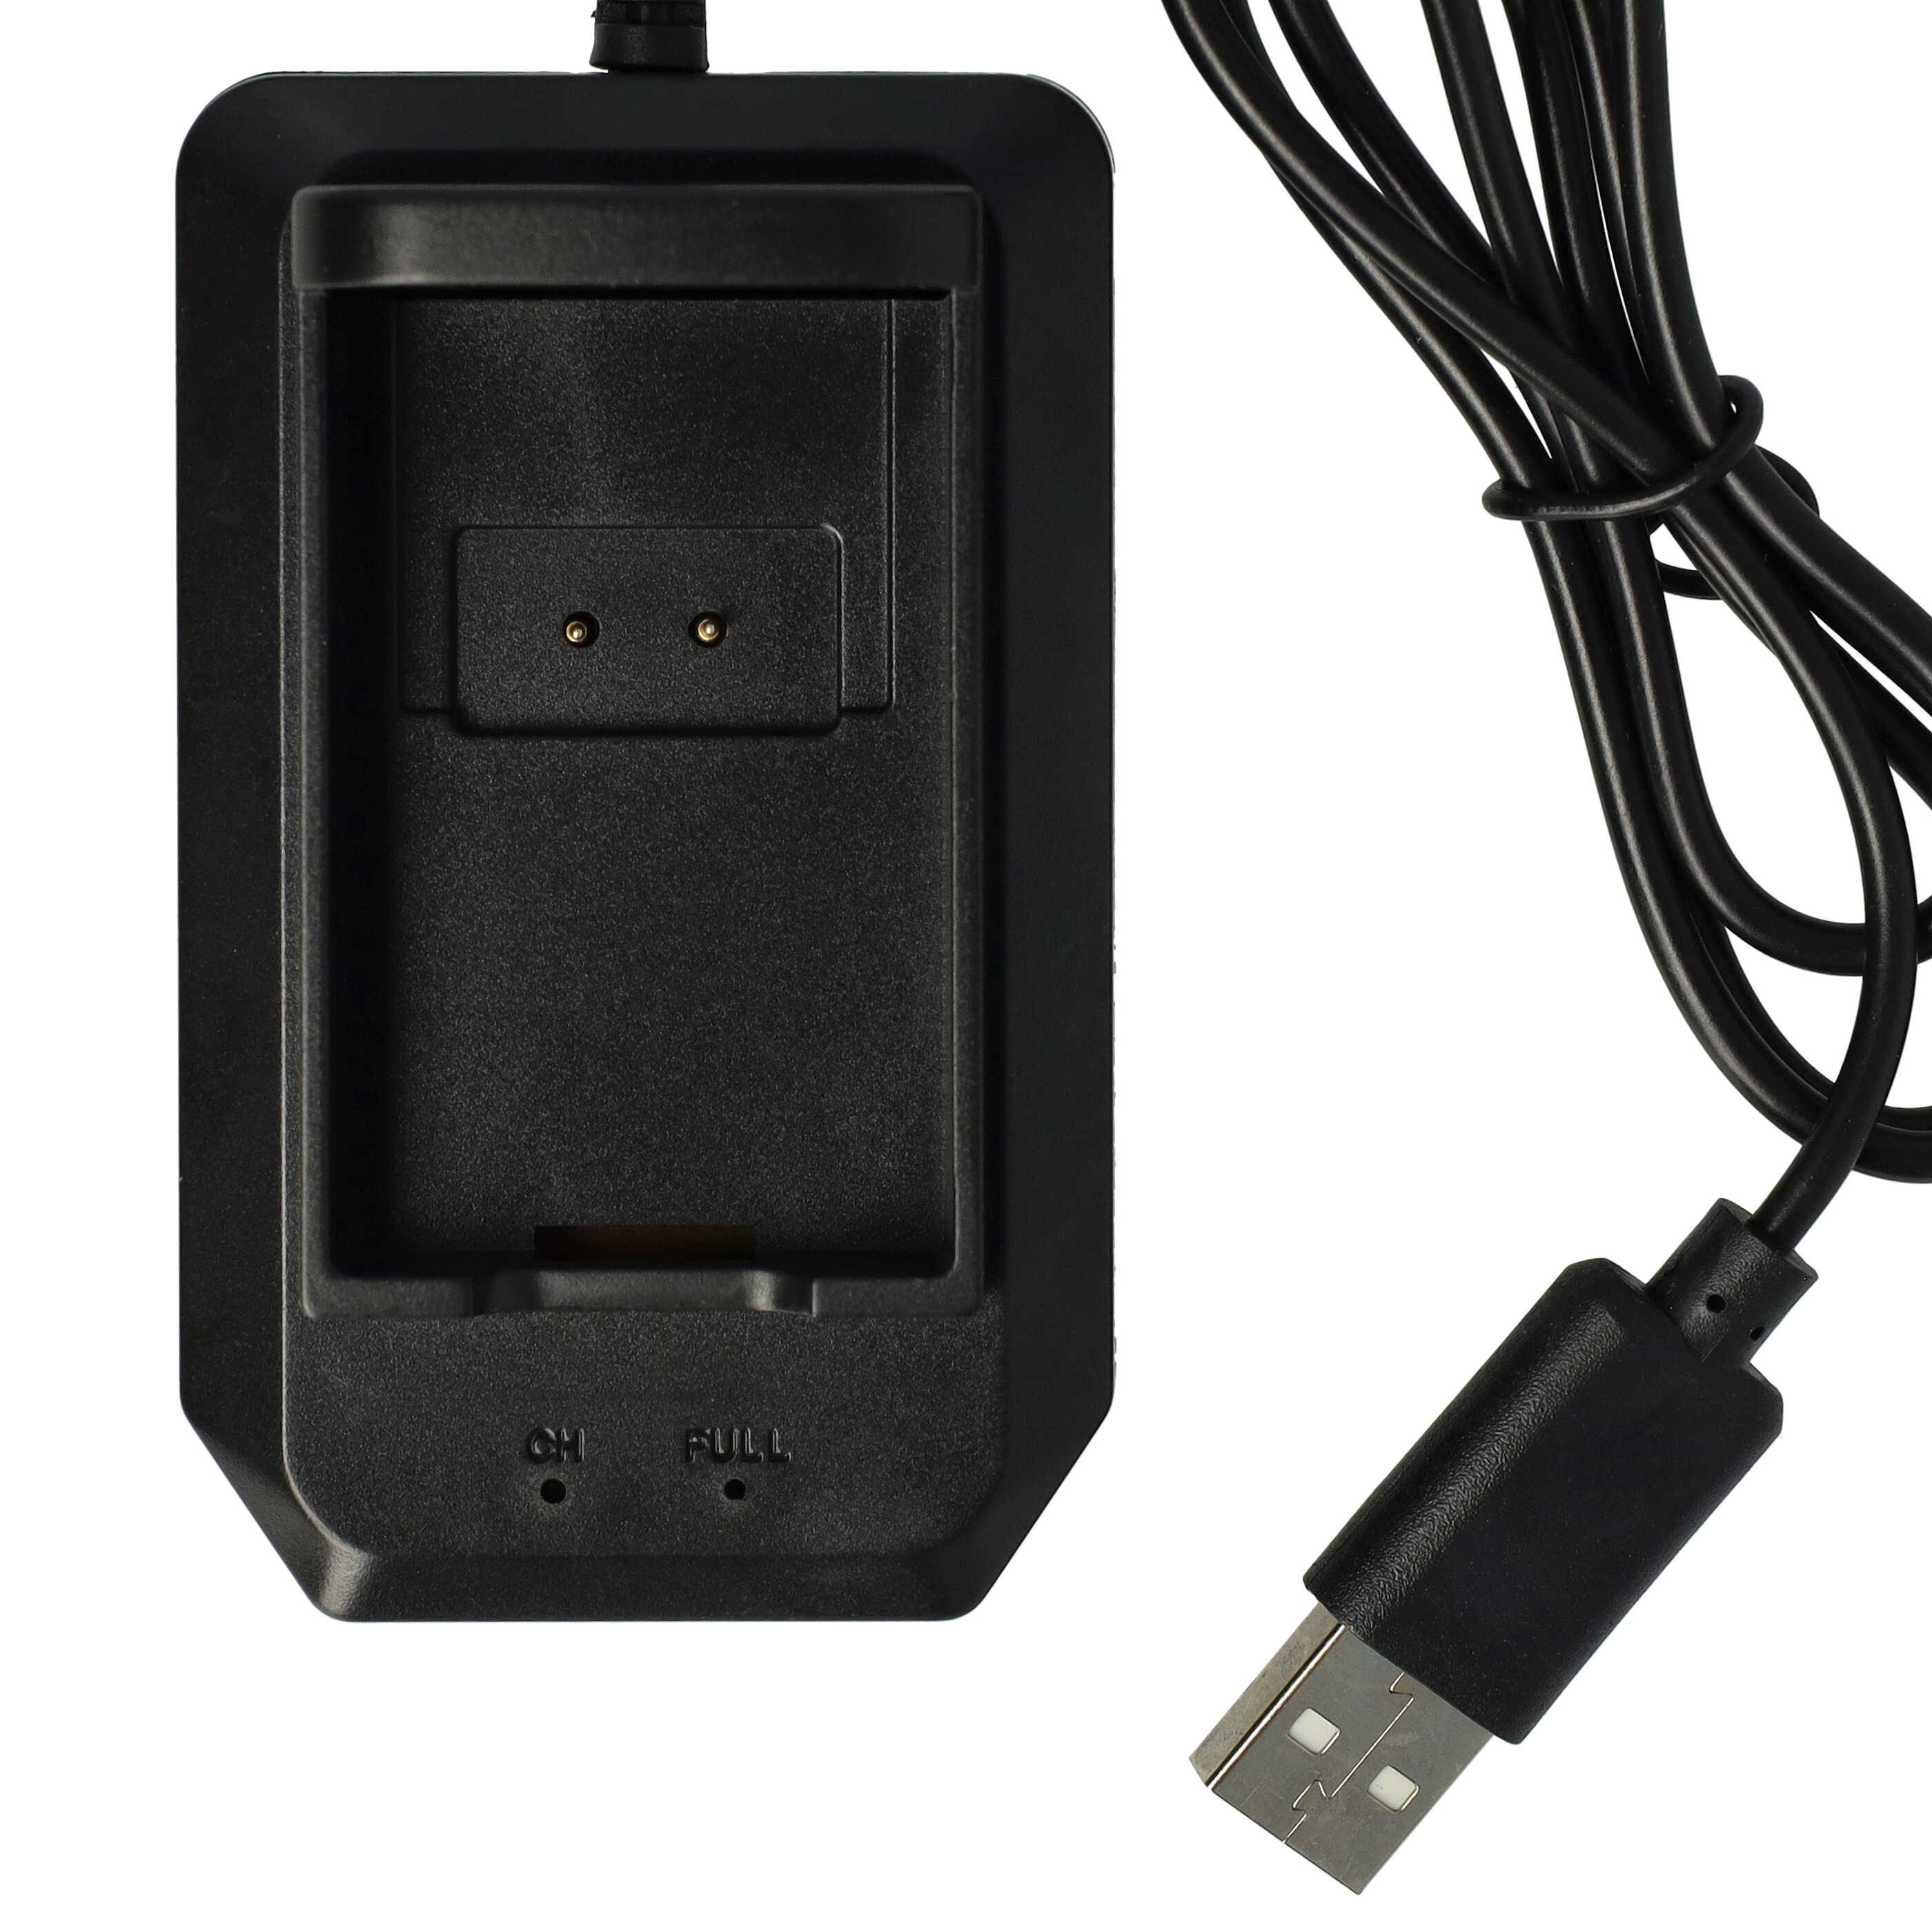 vhbw Play & Charge Kit - 1x charger, 1x charging cable, 2x battery Black